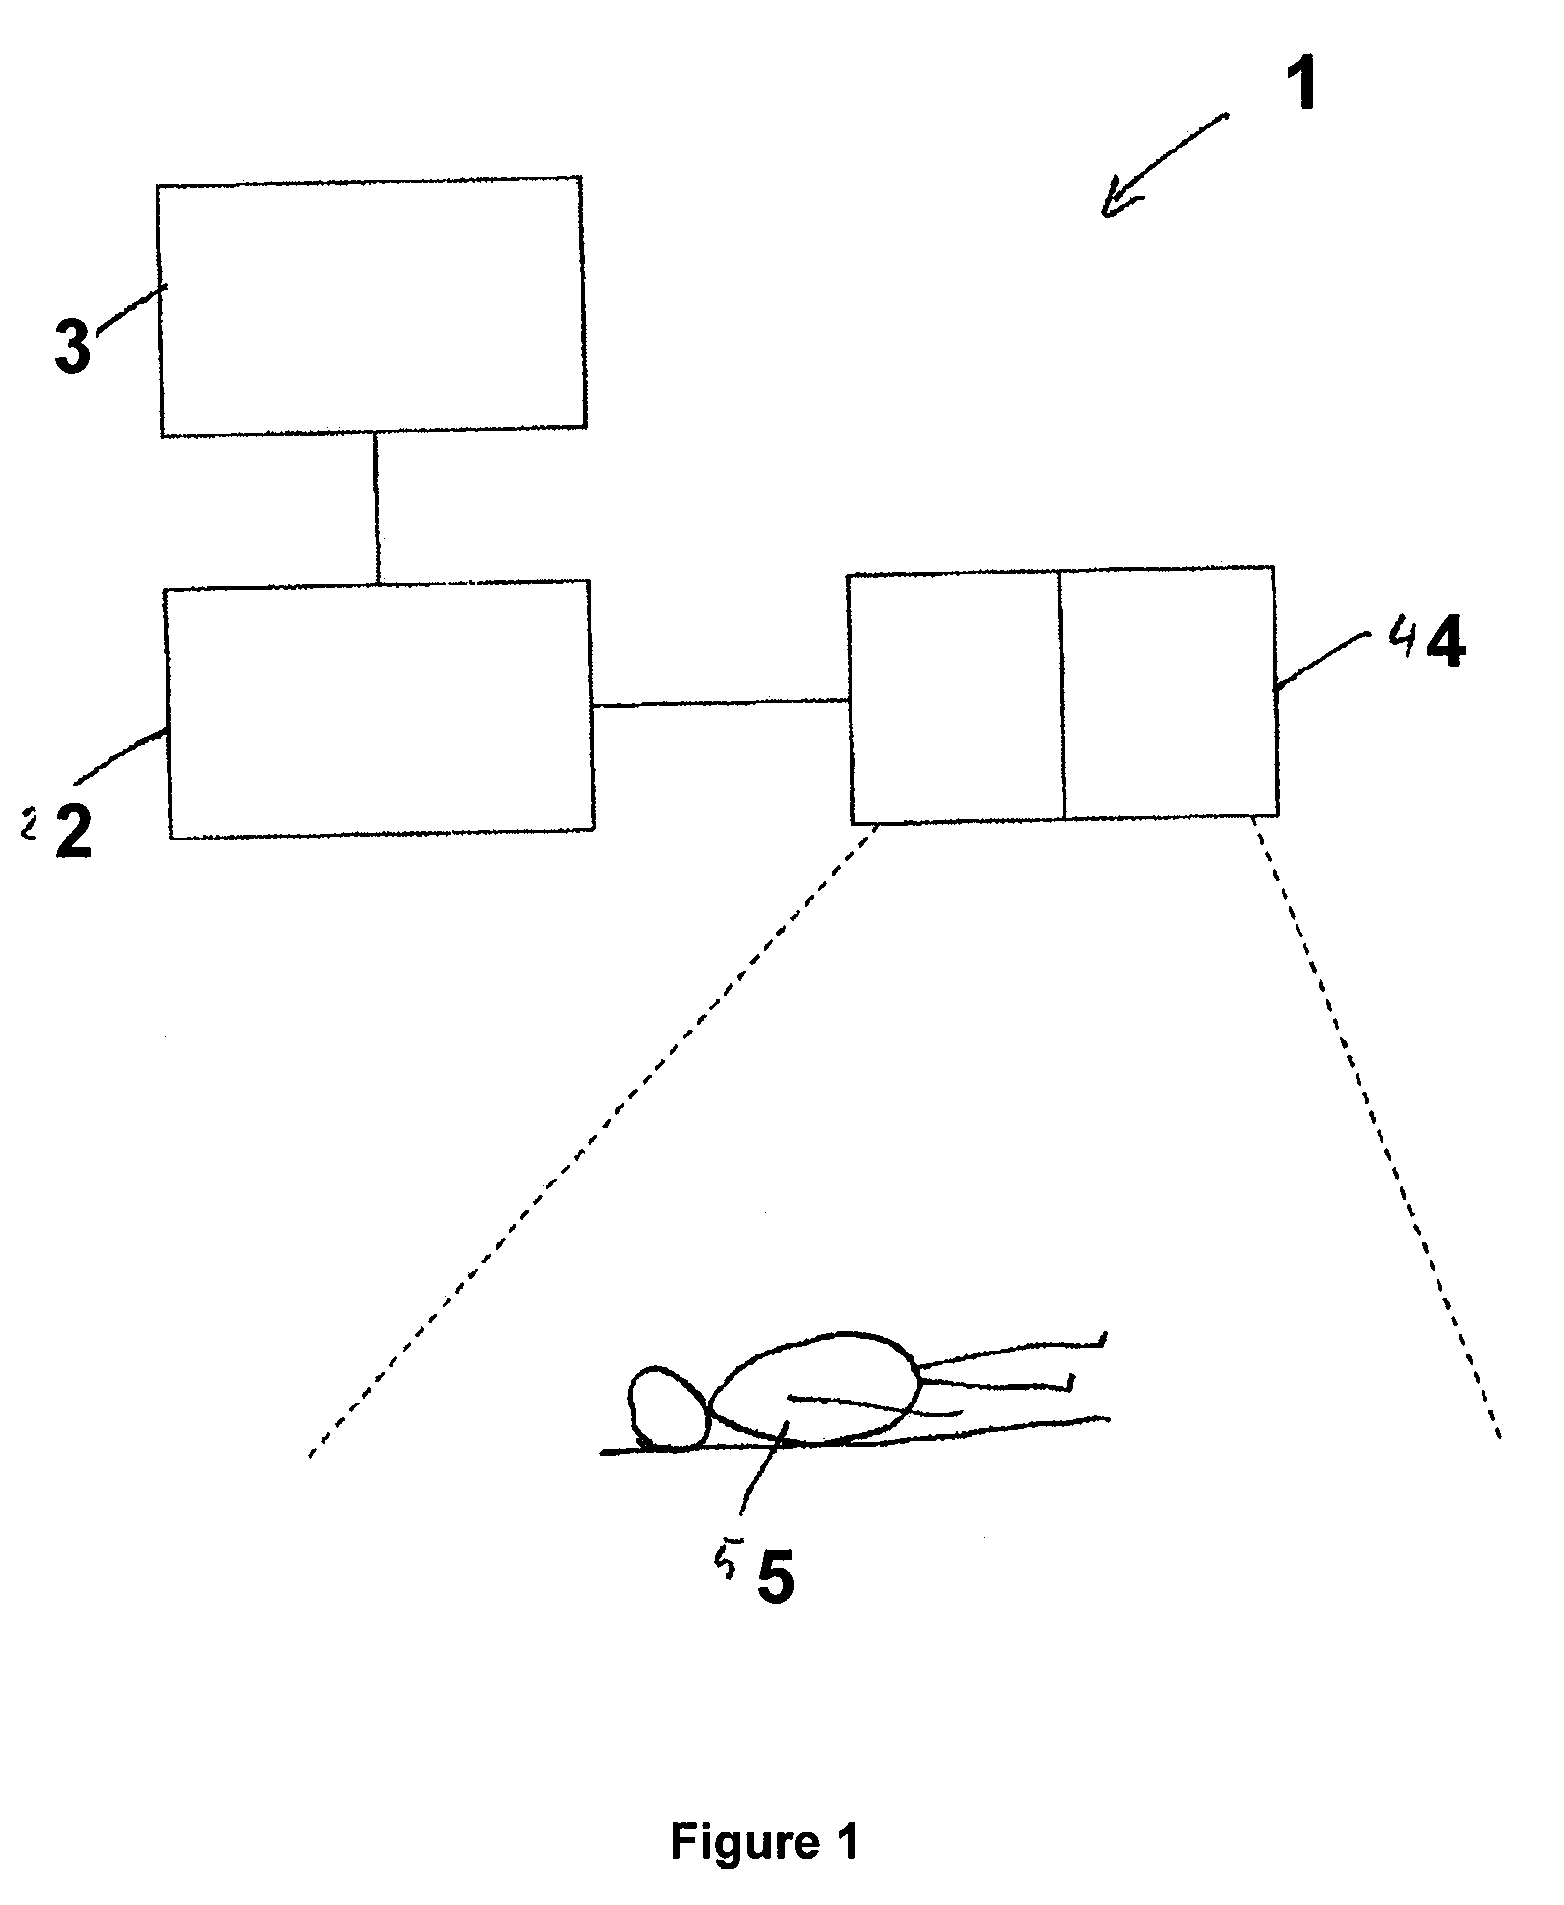 Method for ascertaining the position of a medical instrument in a body